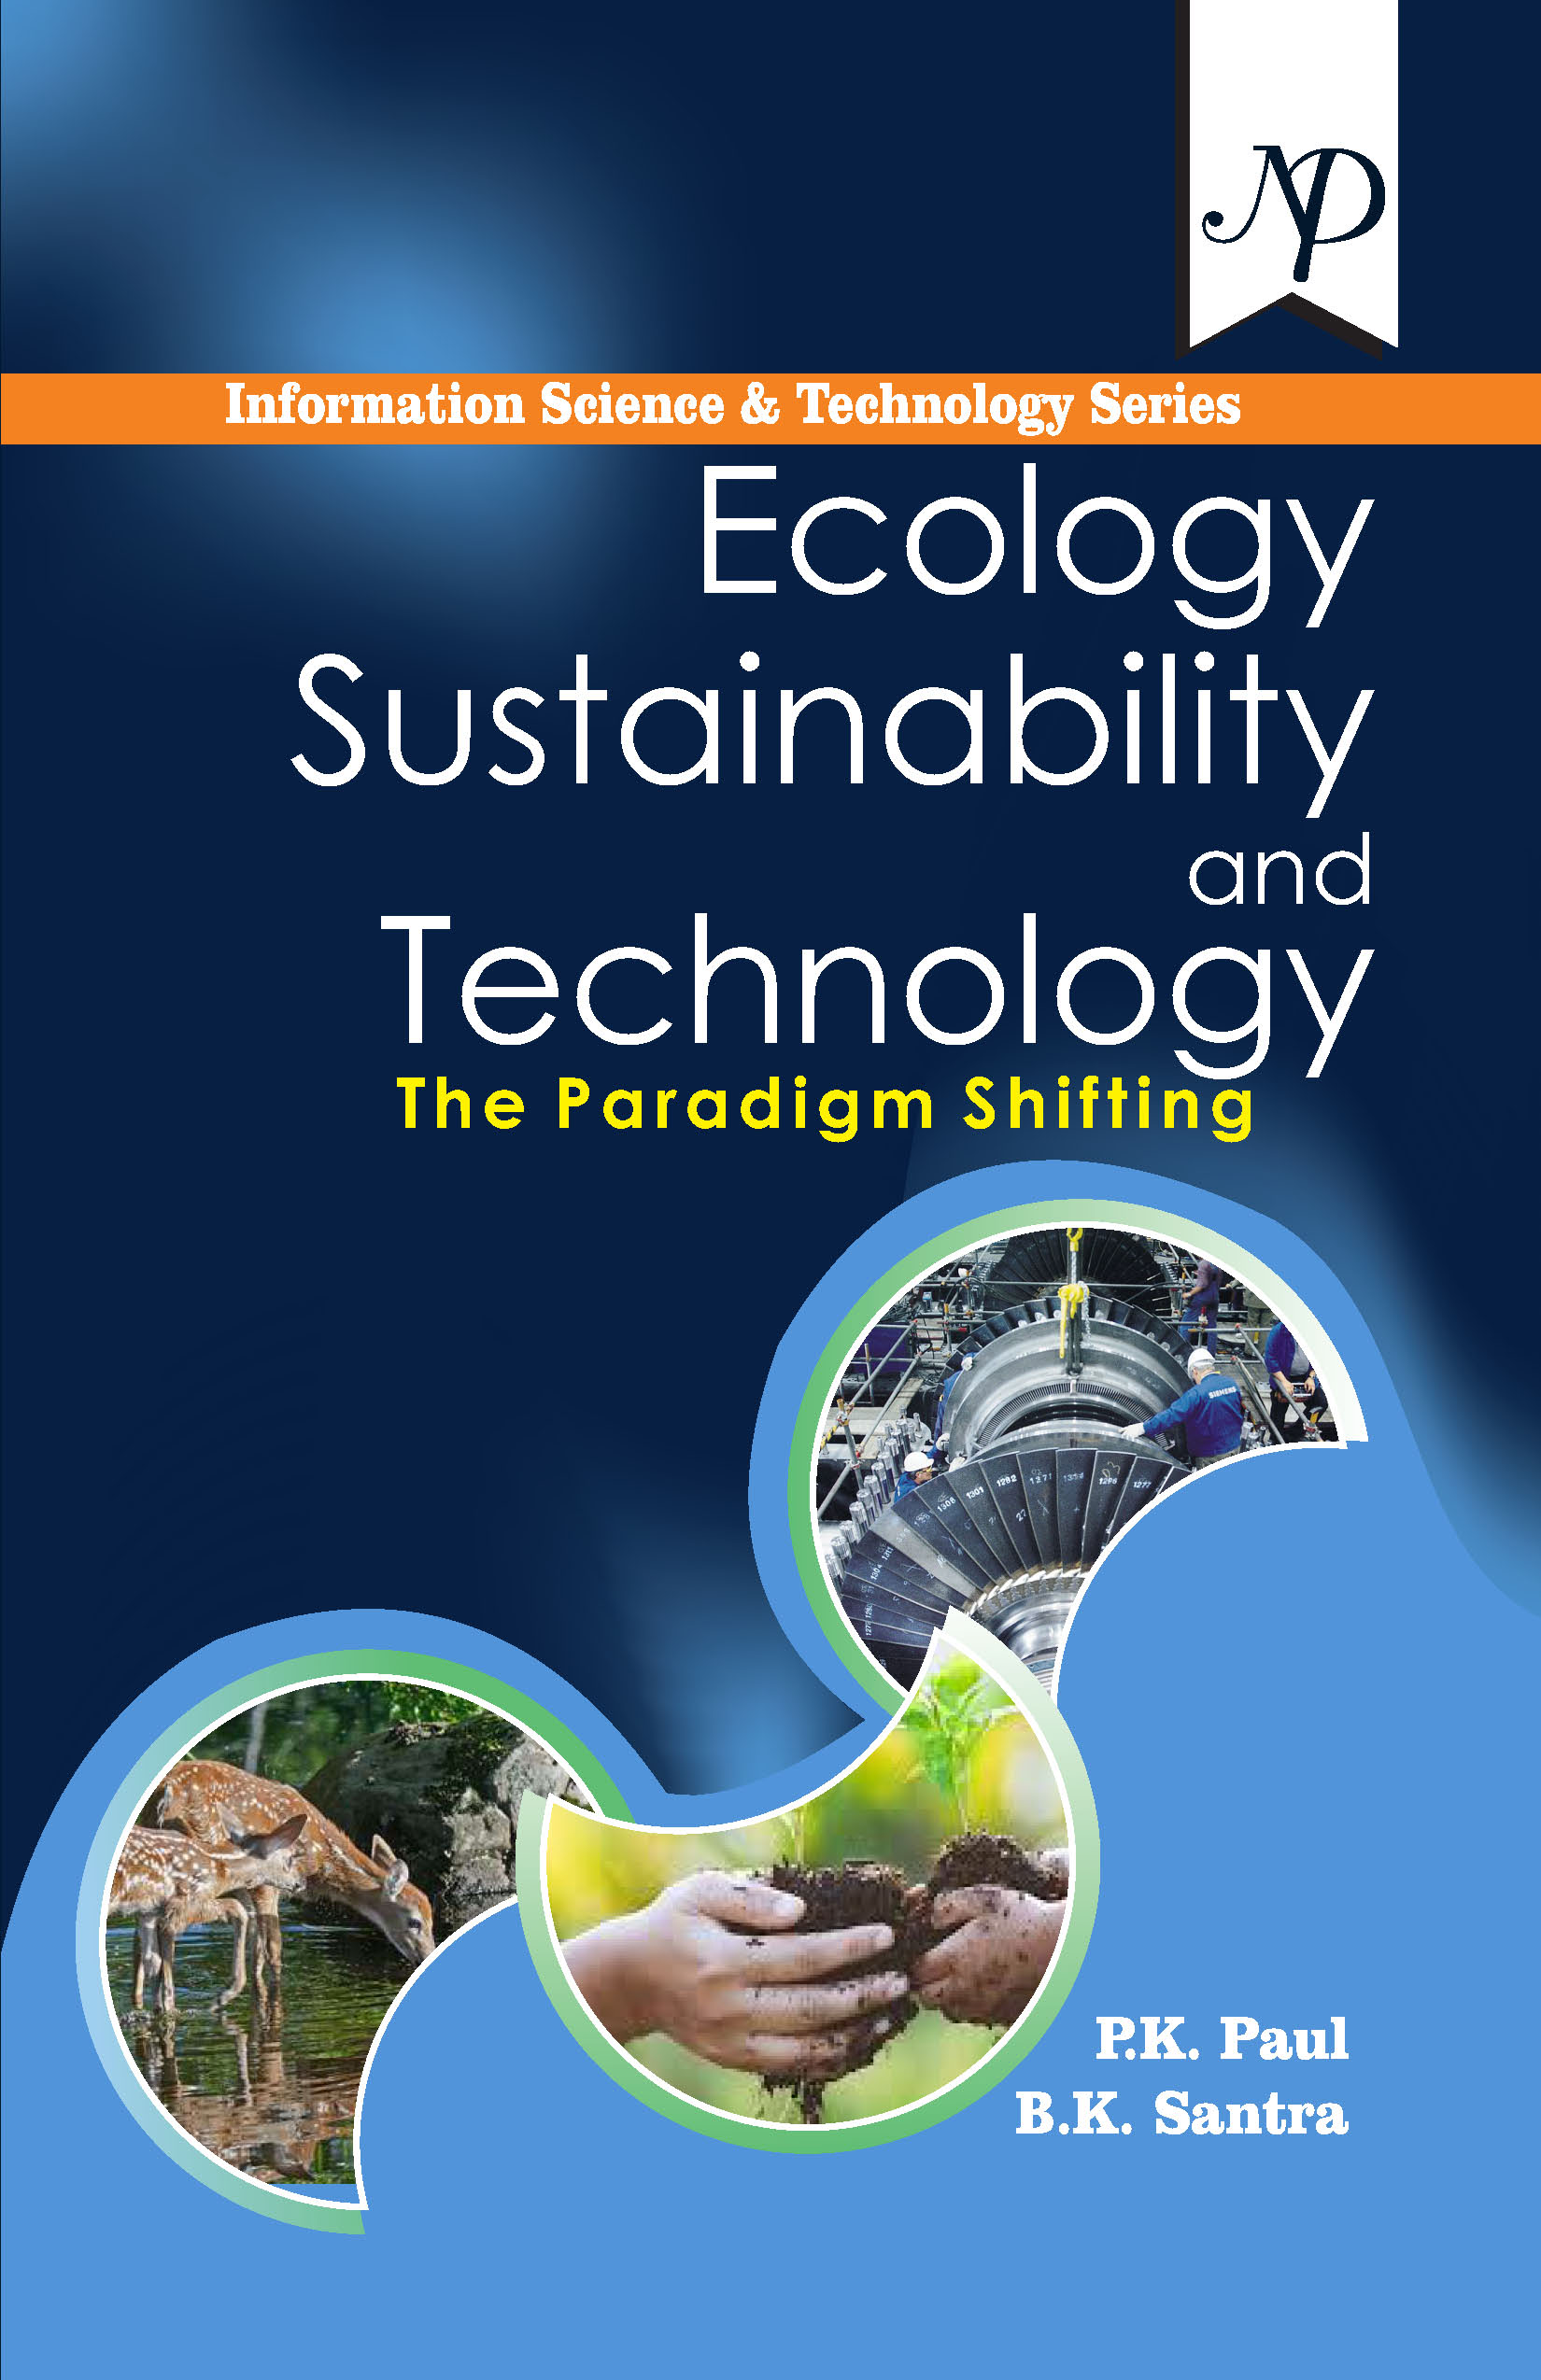 Ecology, Sustainability and technology Cover.jpg